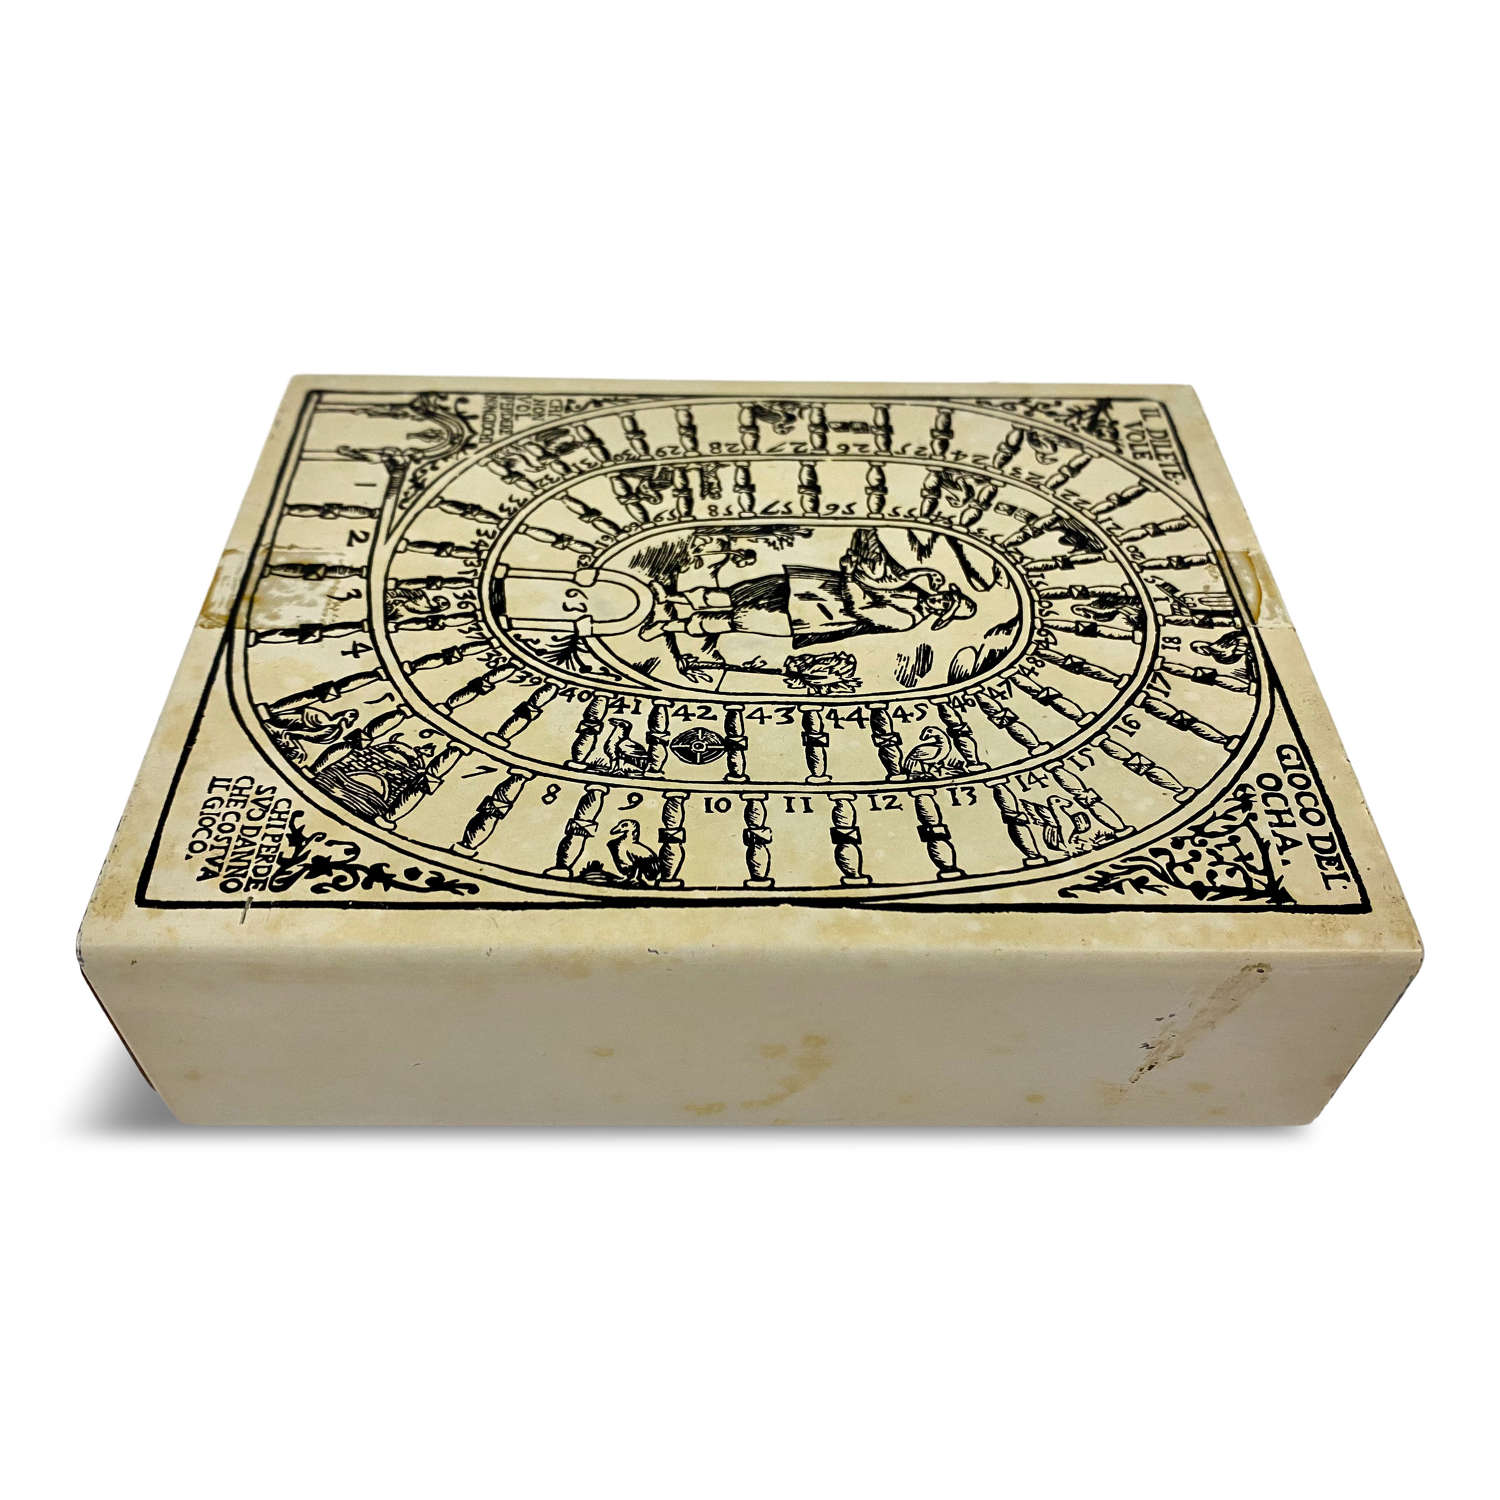 Litho Printed Storage Box in the Style of Fornasetti